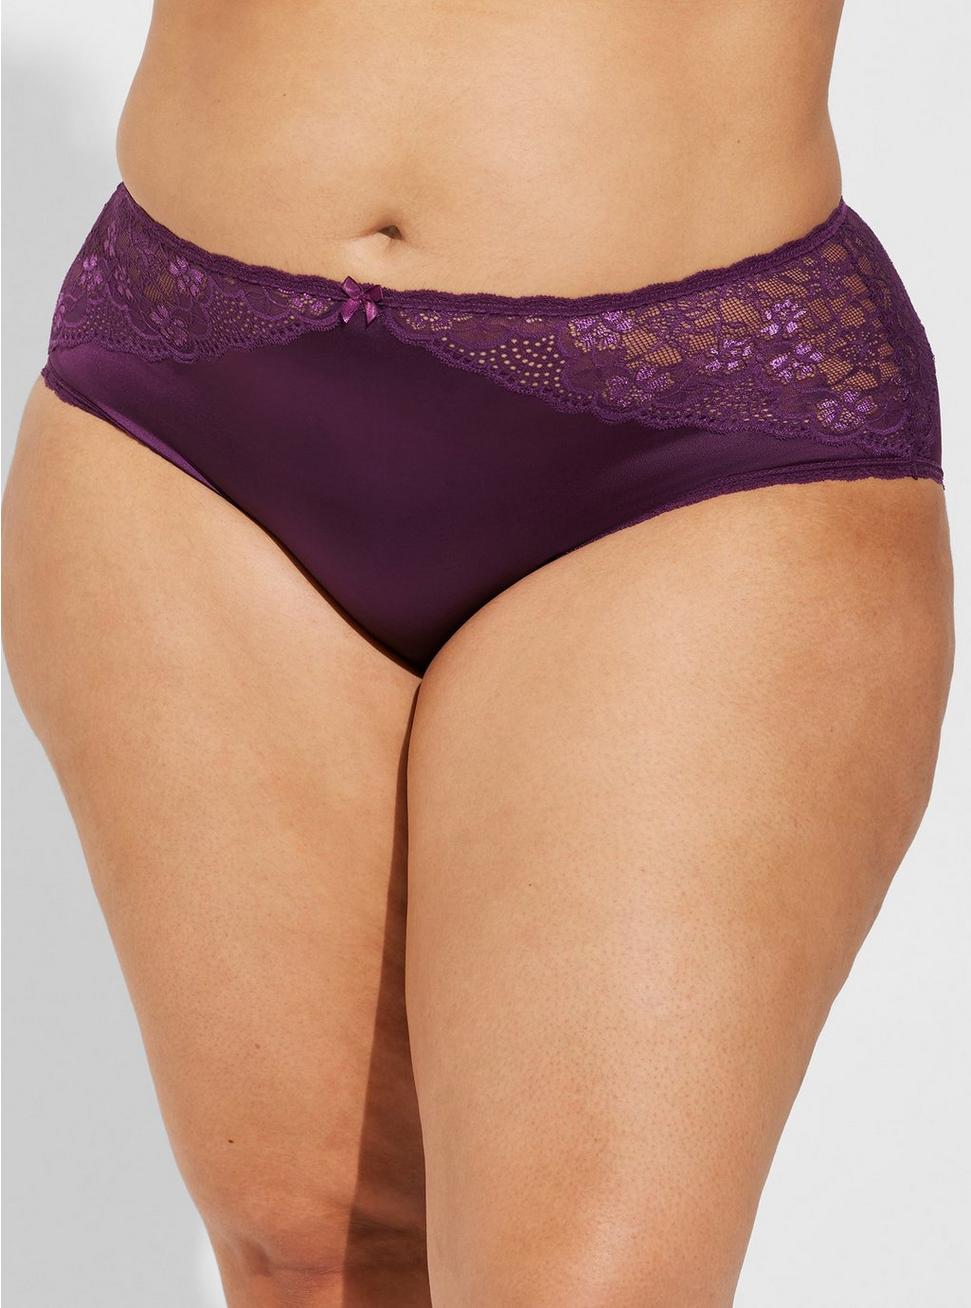 Shine And Lace Mid-Rise Cheeky Panty, DEEP PURPLE, alternate